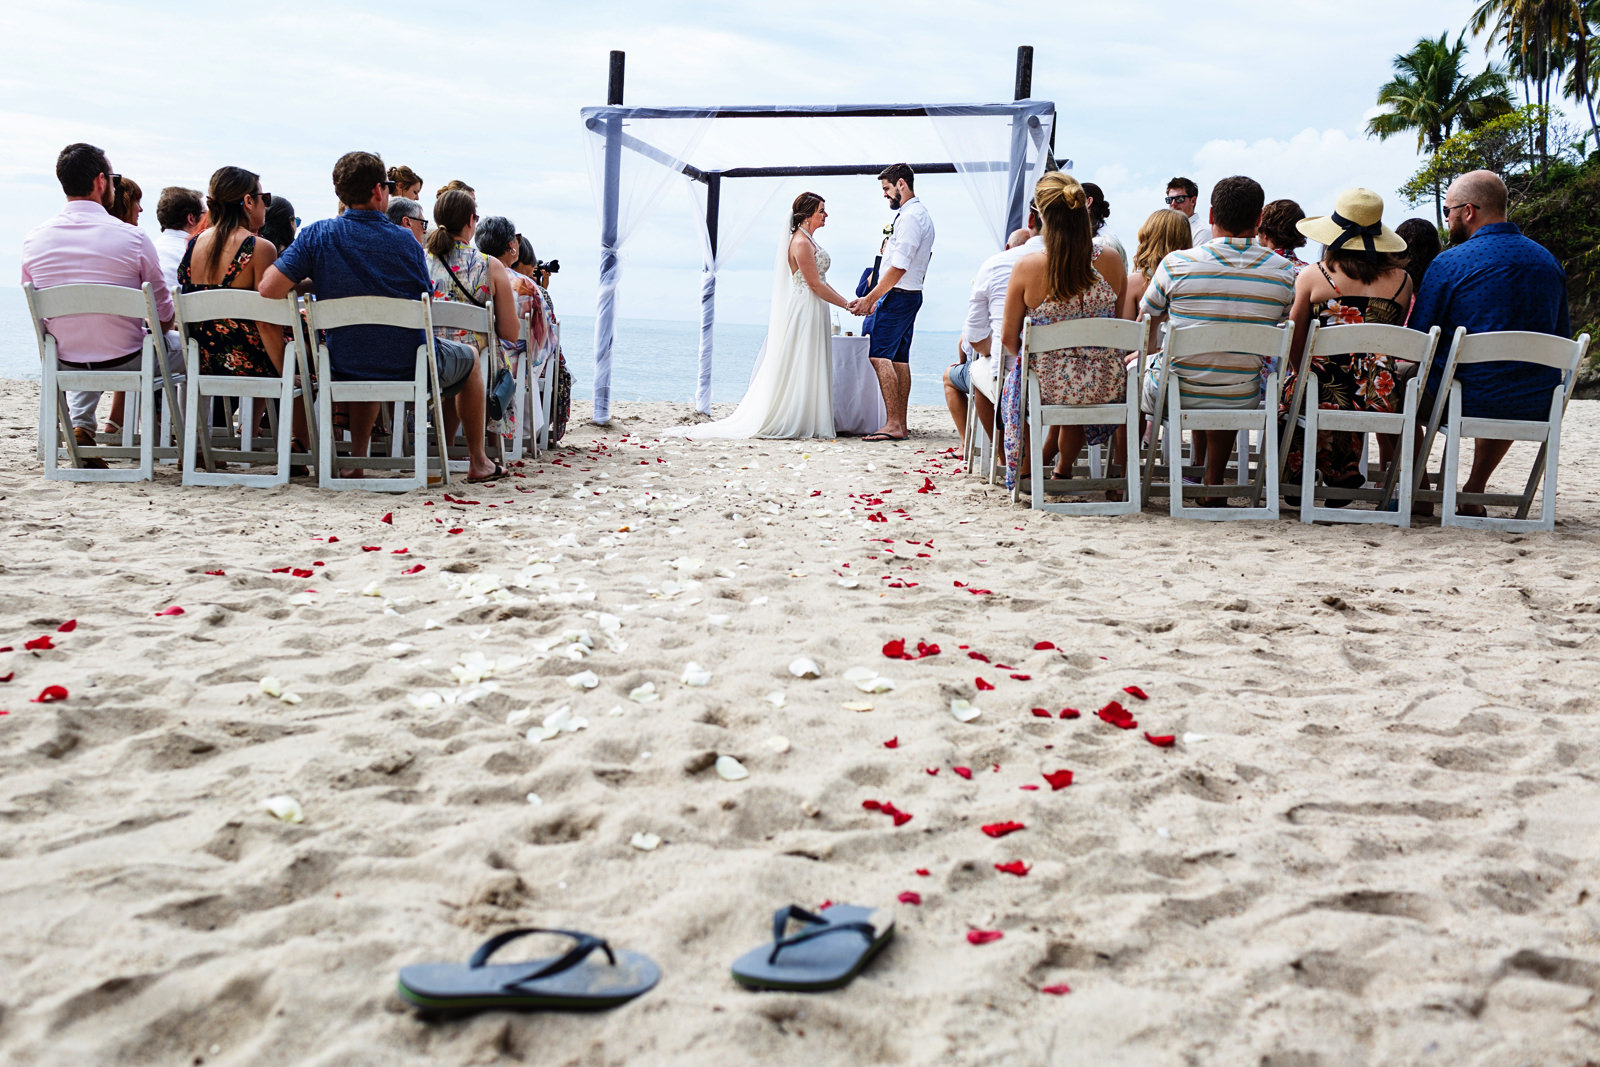 The bride left her flip-flops at the beginning of the aisle for the beach wedding ceremony.